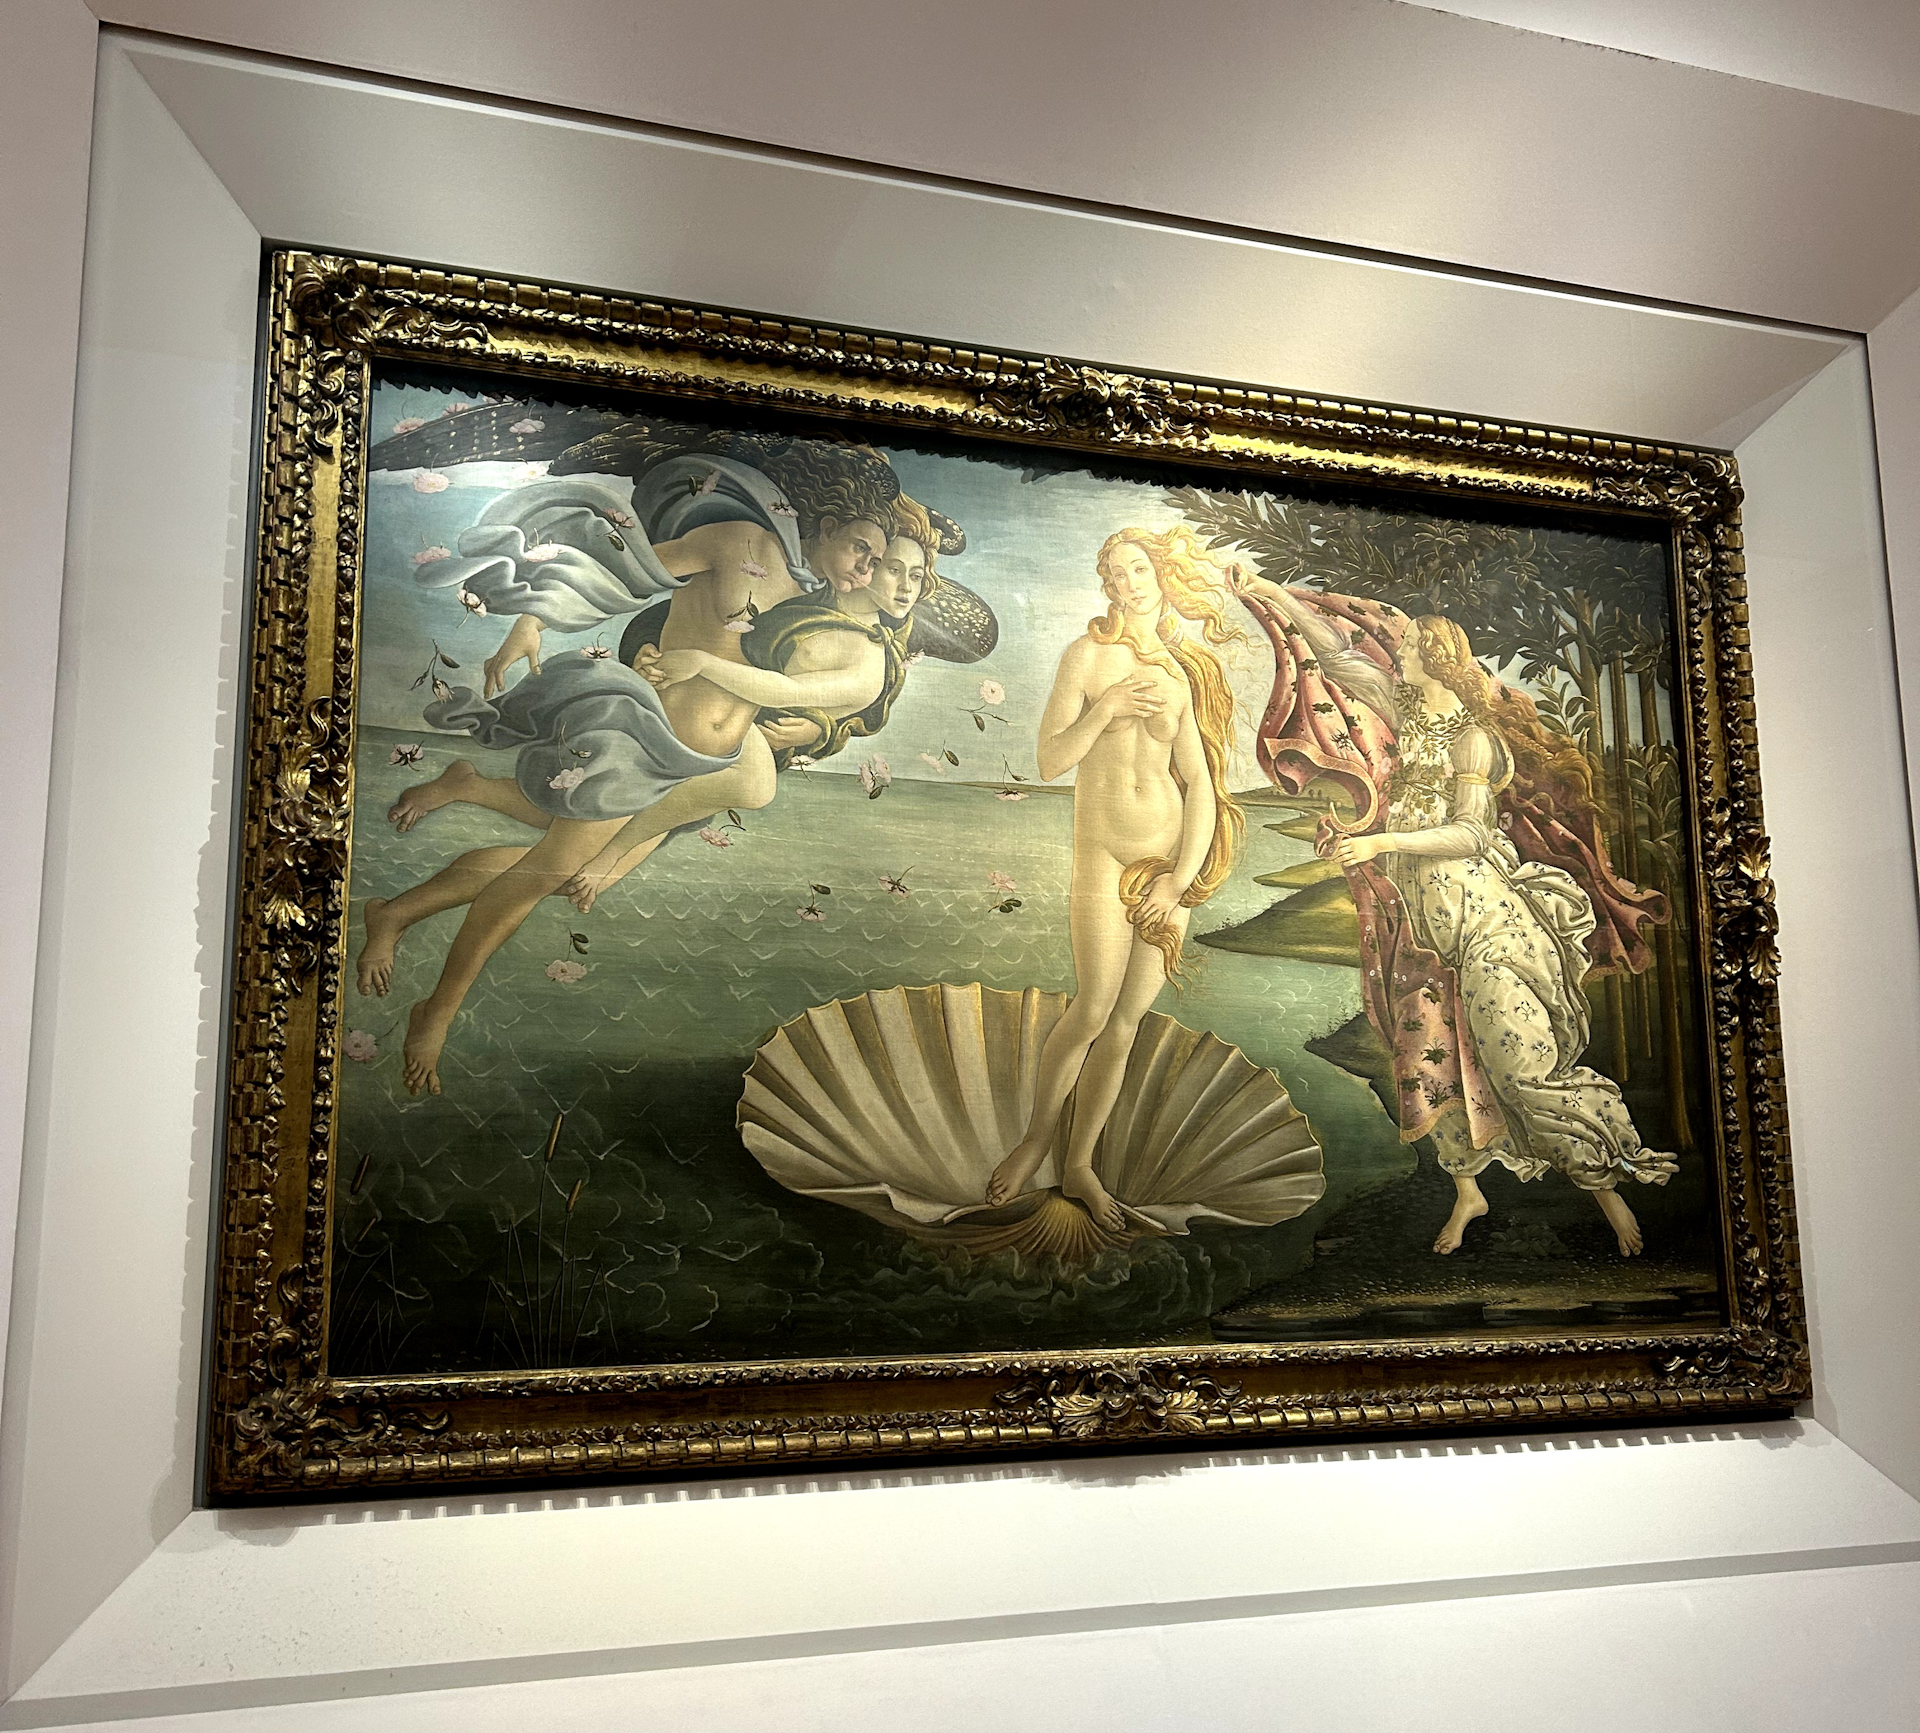 The birth of Venus by Botticelli hanging in the Uffizi Gallery, Florence